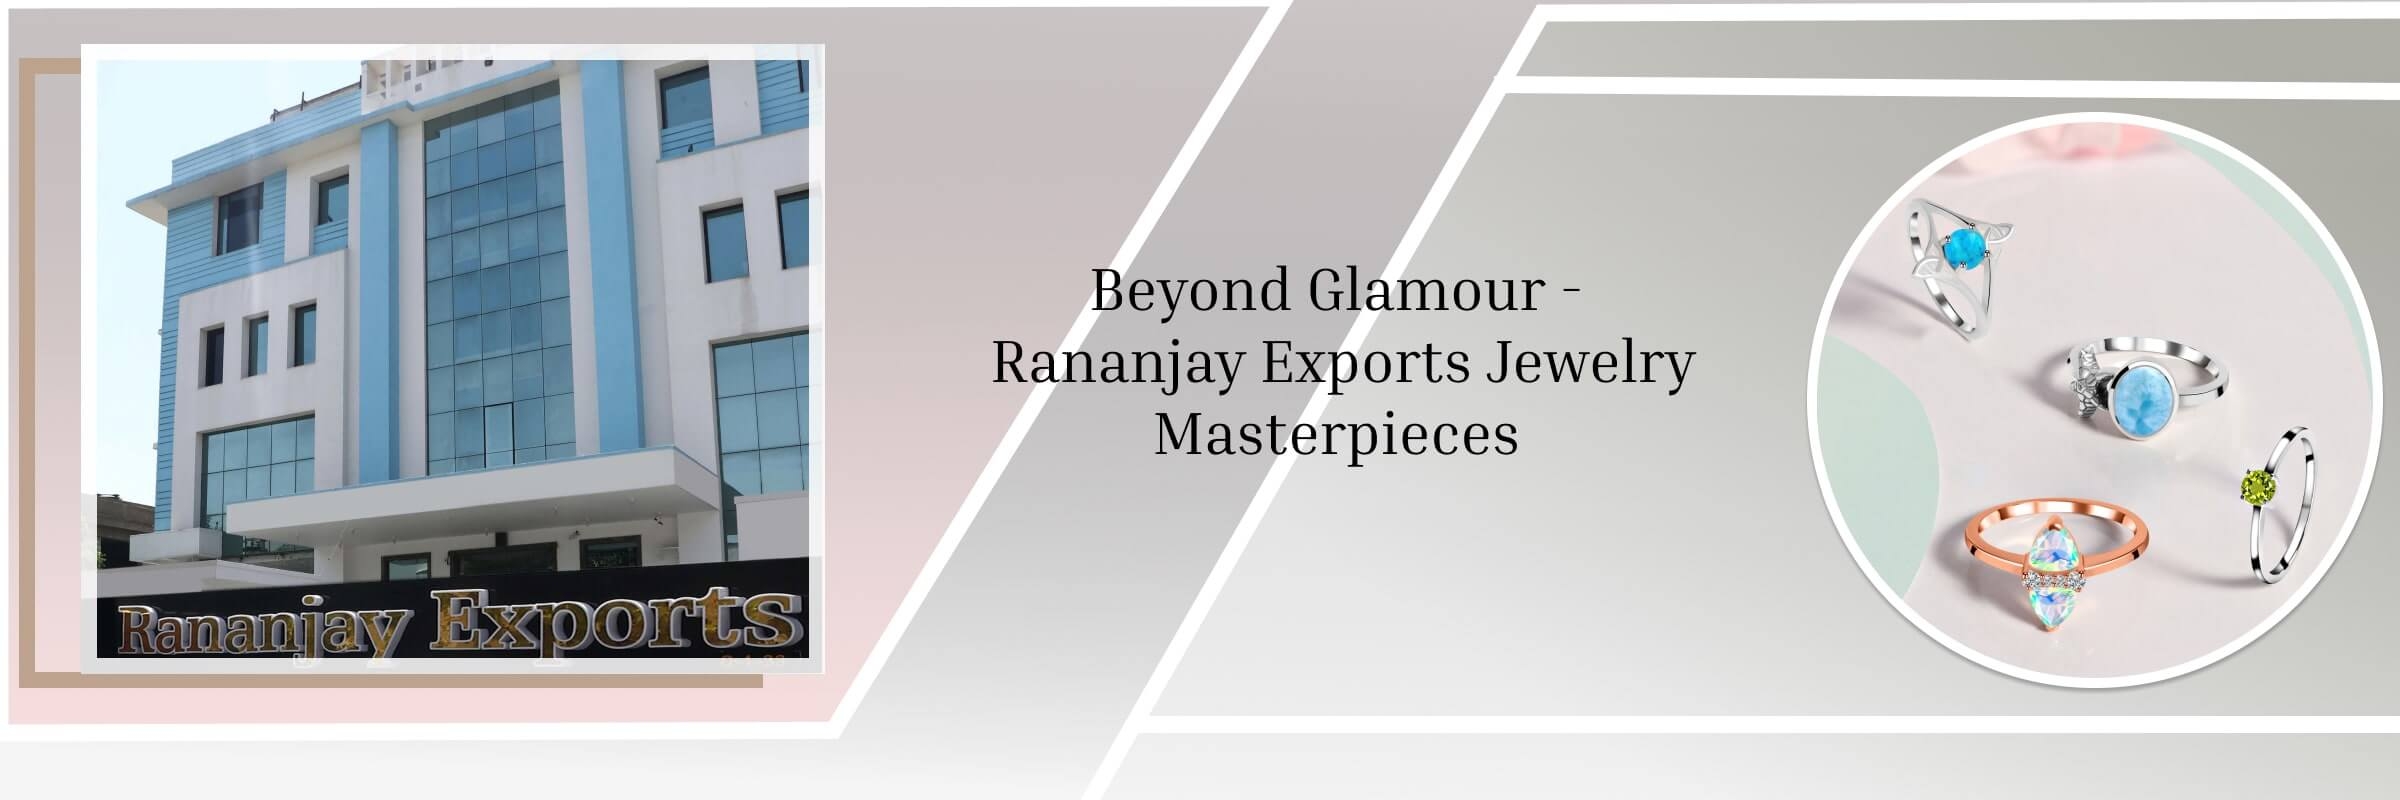 Rananjay Exports is One of The Best Jewelry Brands, Why?